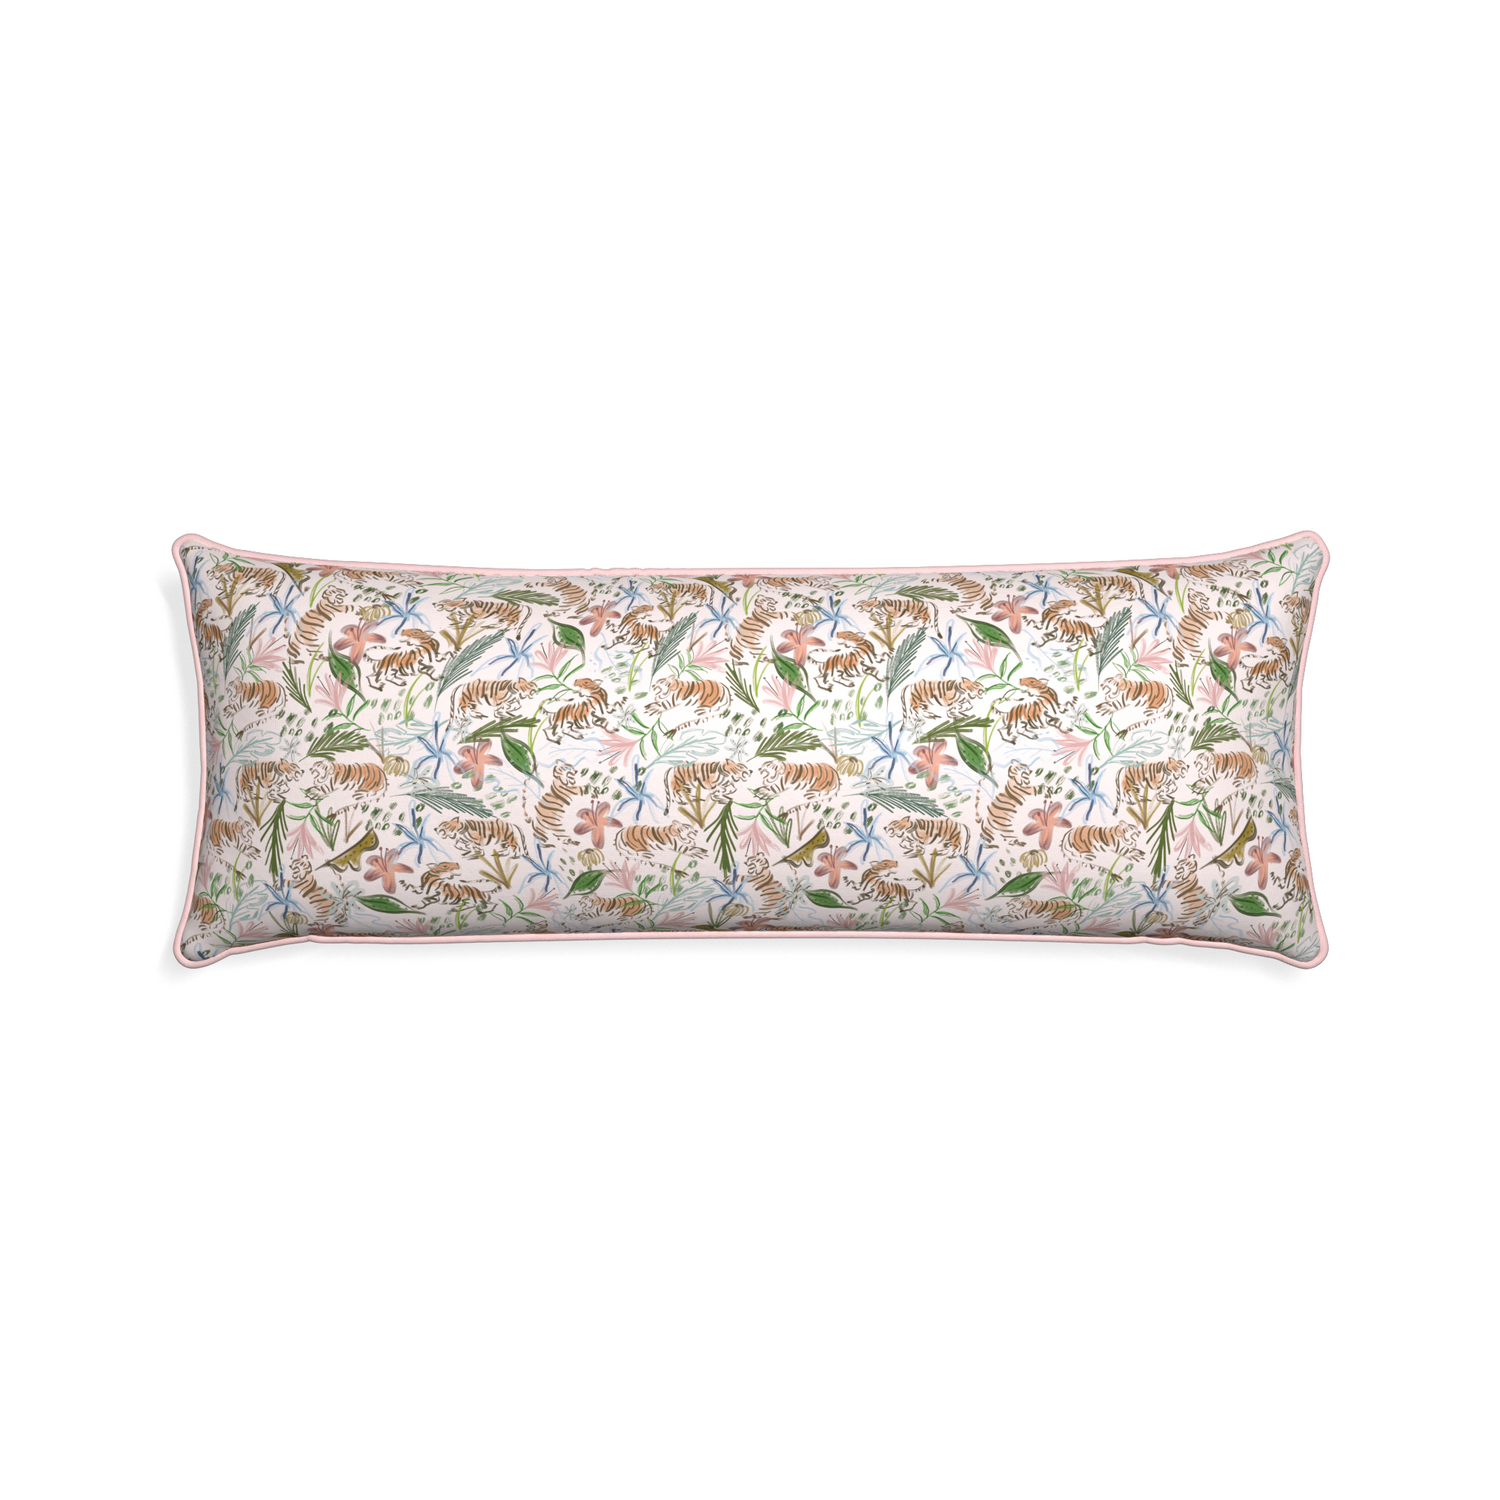 Xl-lumbar frida pink custom pillow with petal piping on white background